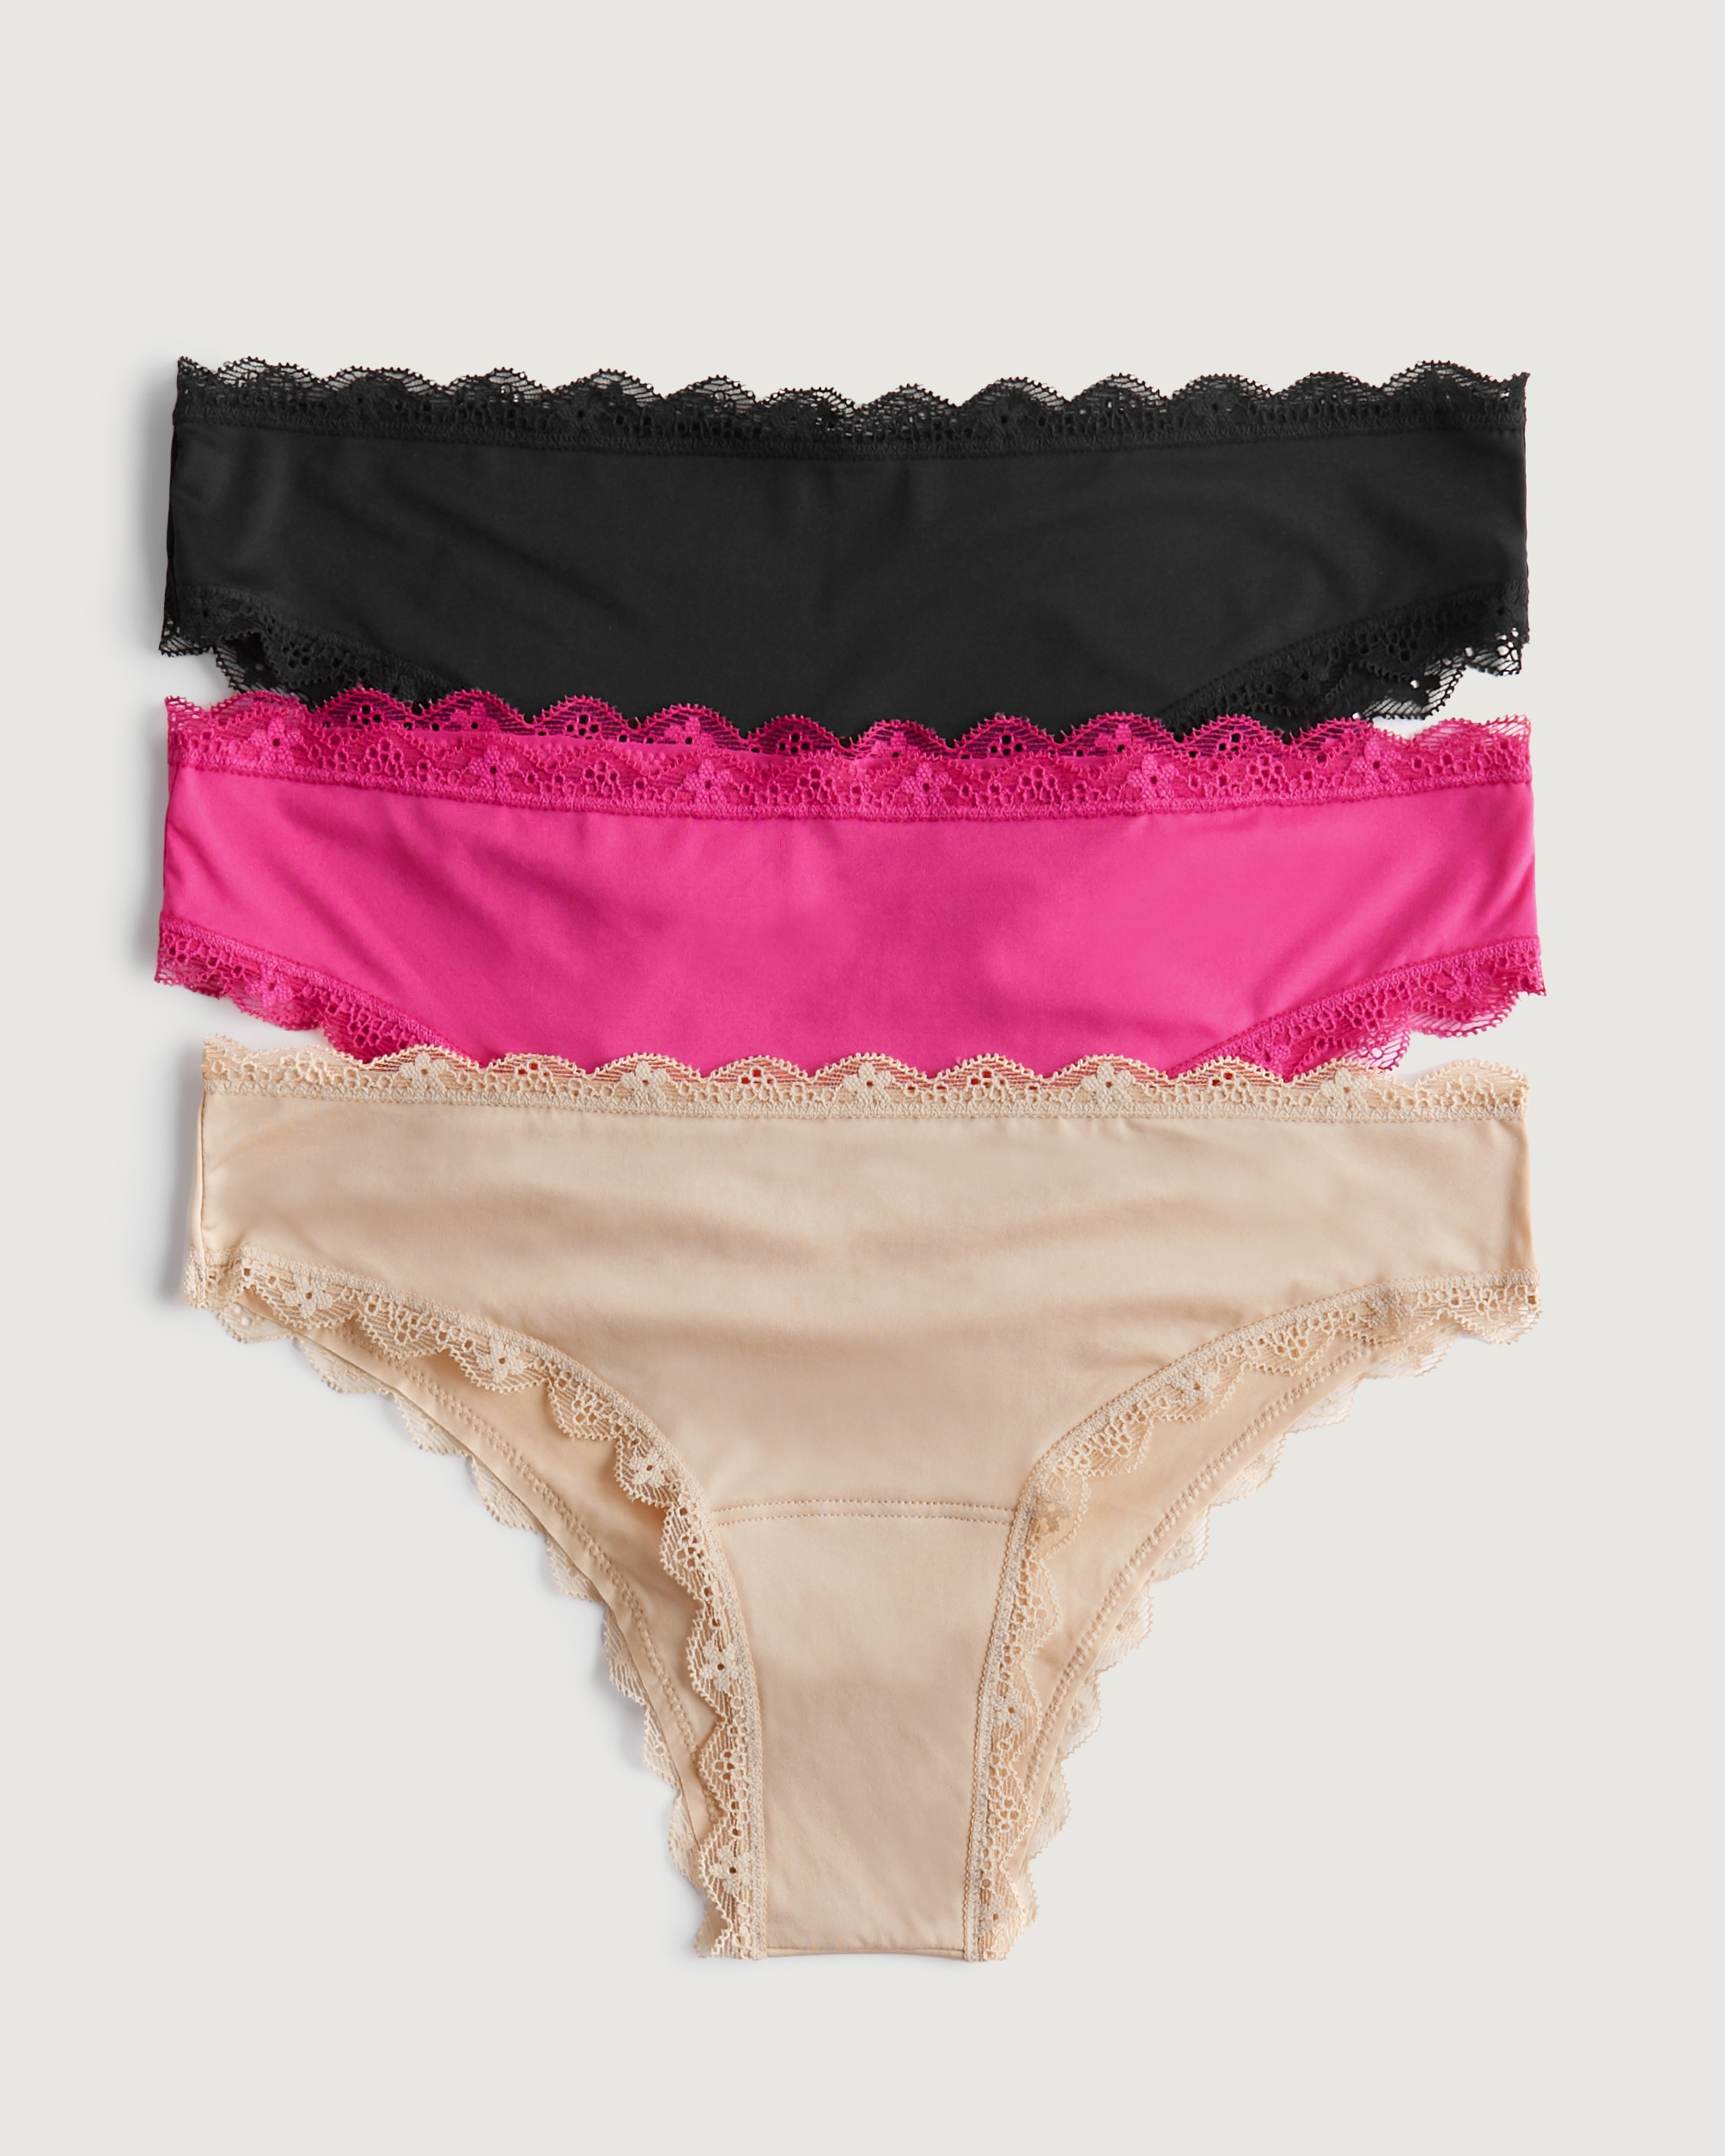 Gilly Hicks Micro Cheeky 3-Pack